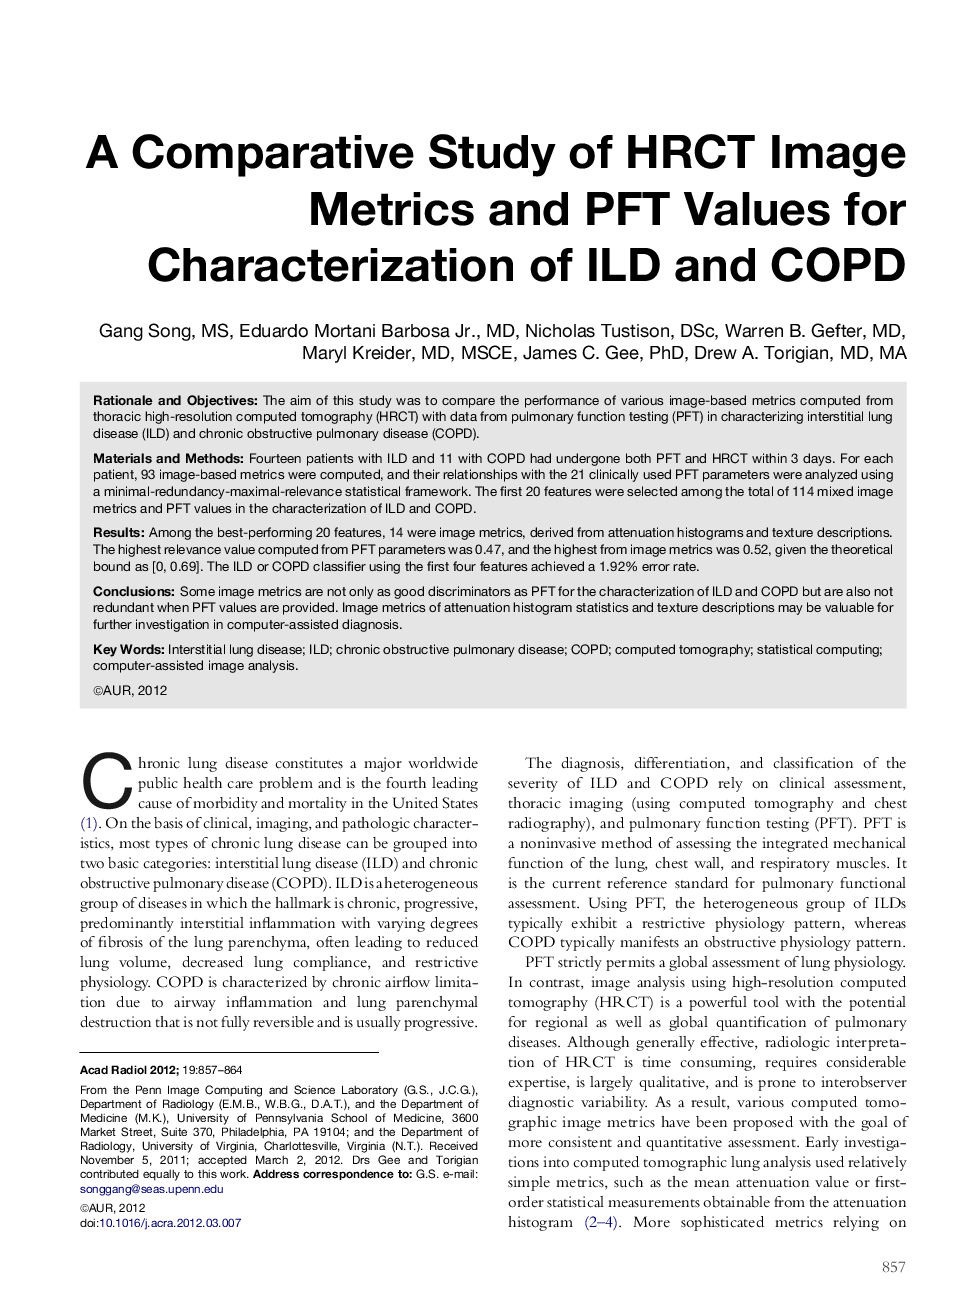 A Comparative Study of HRCT Image Metrics and PFT Values for Characterization of ILD and COPD